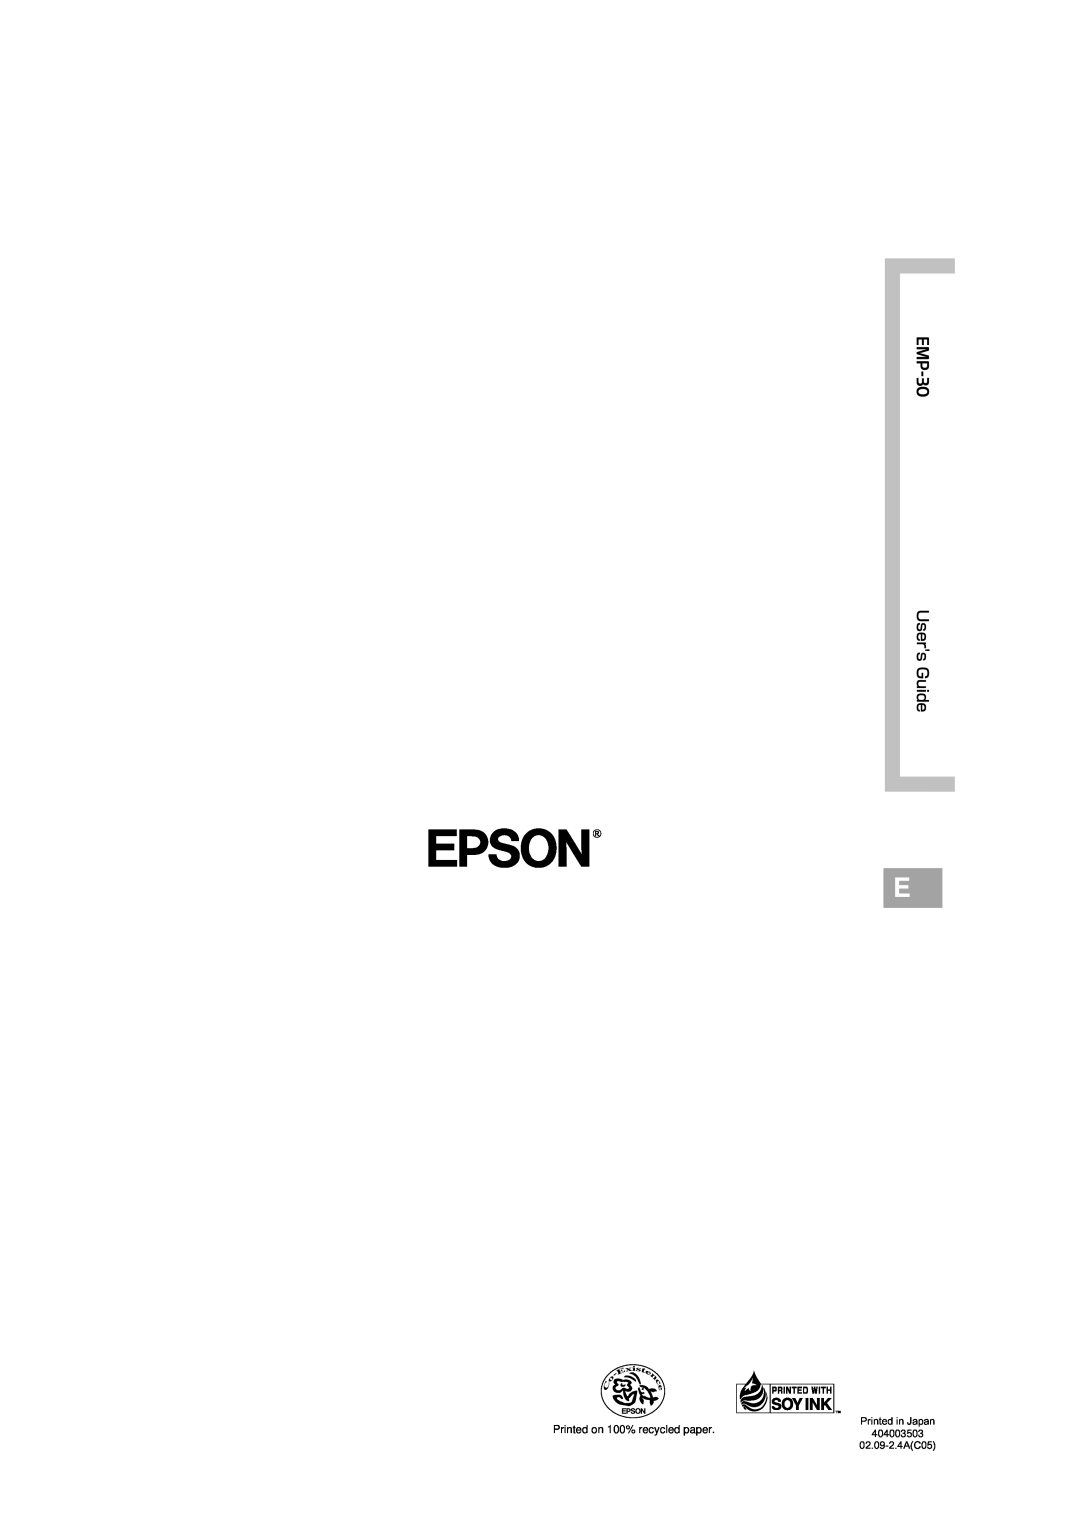 Epson EMP-30 manual Printed on 100% recycled paper, 404003503, 02.09-2.4AC05 